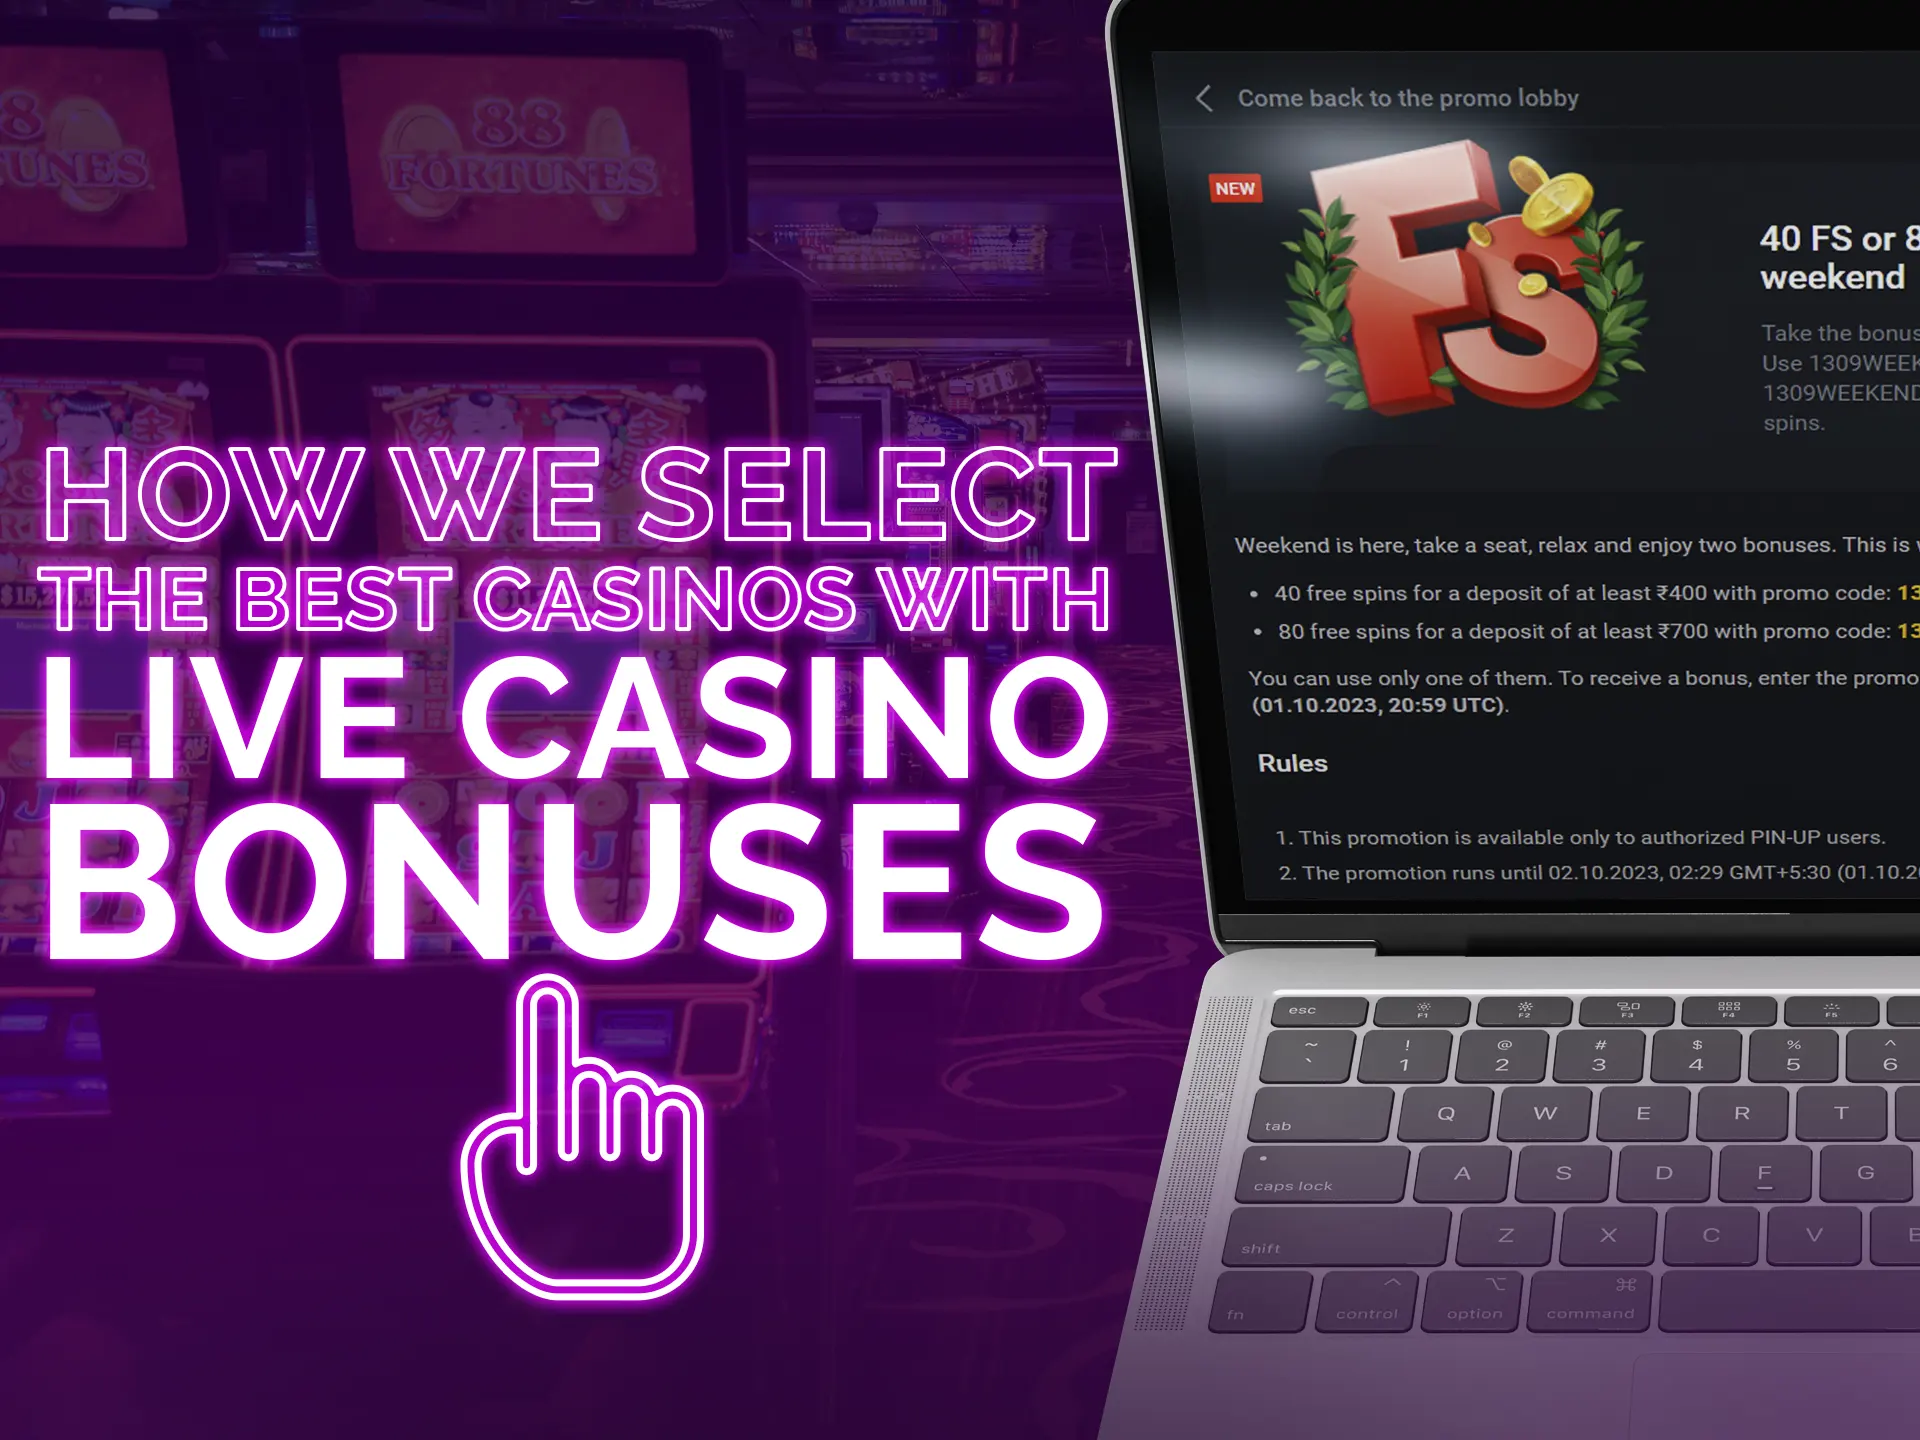 Discover our methods for selecting the best casinos offering live casino bonuses.